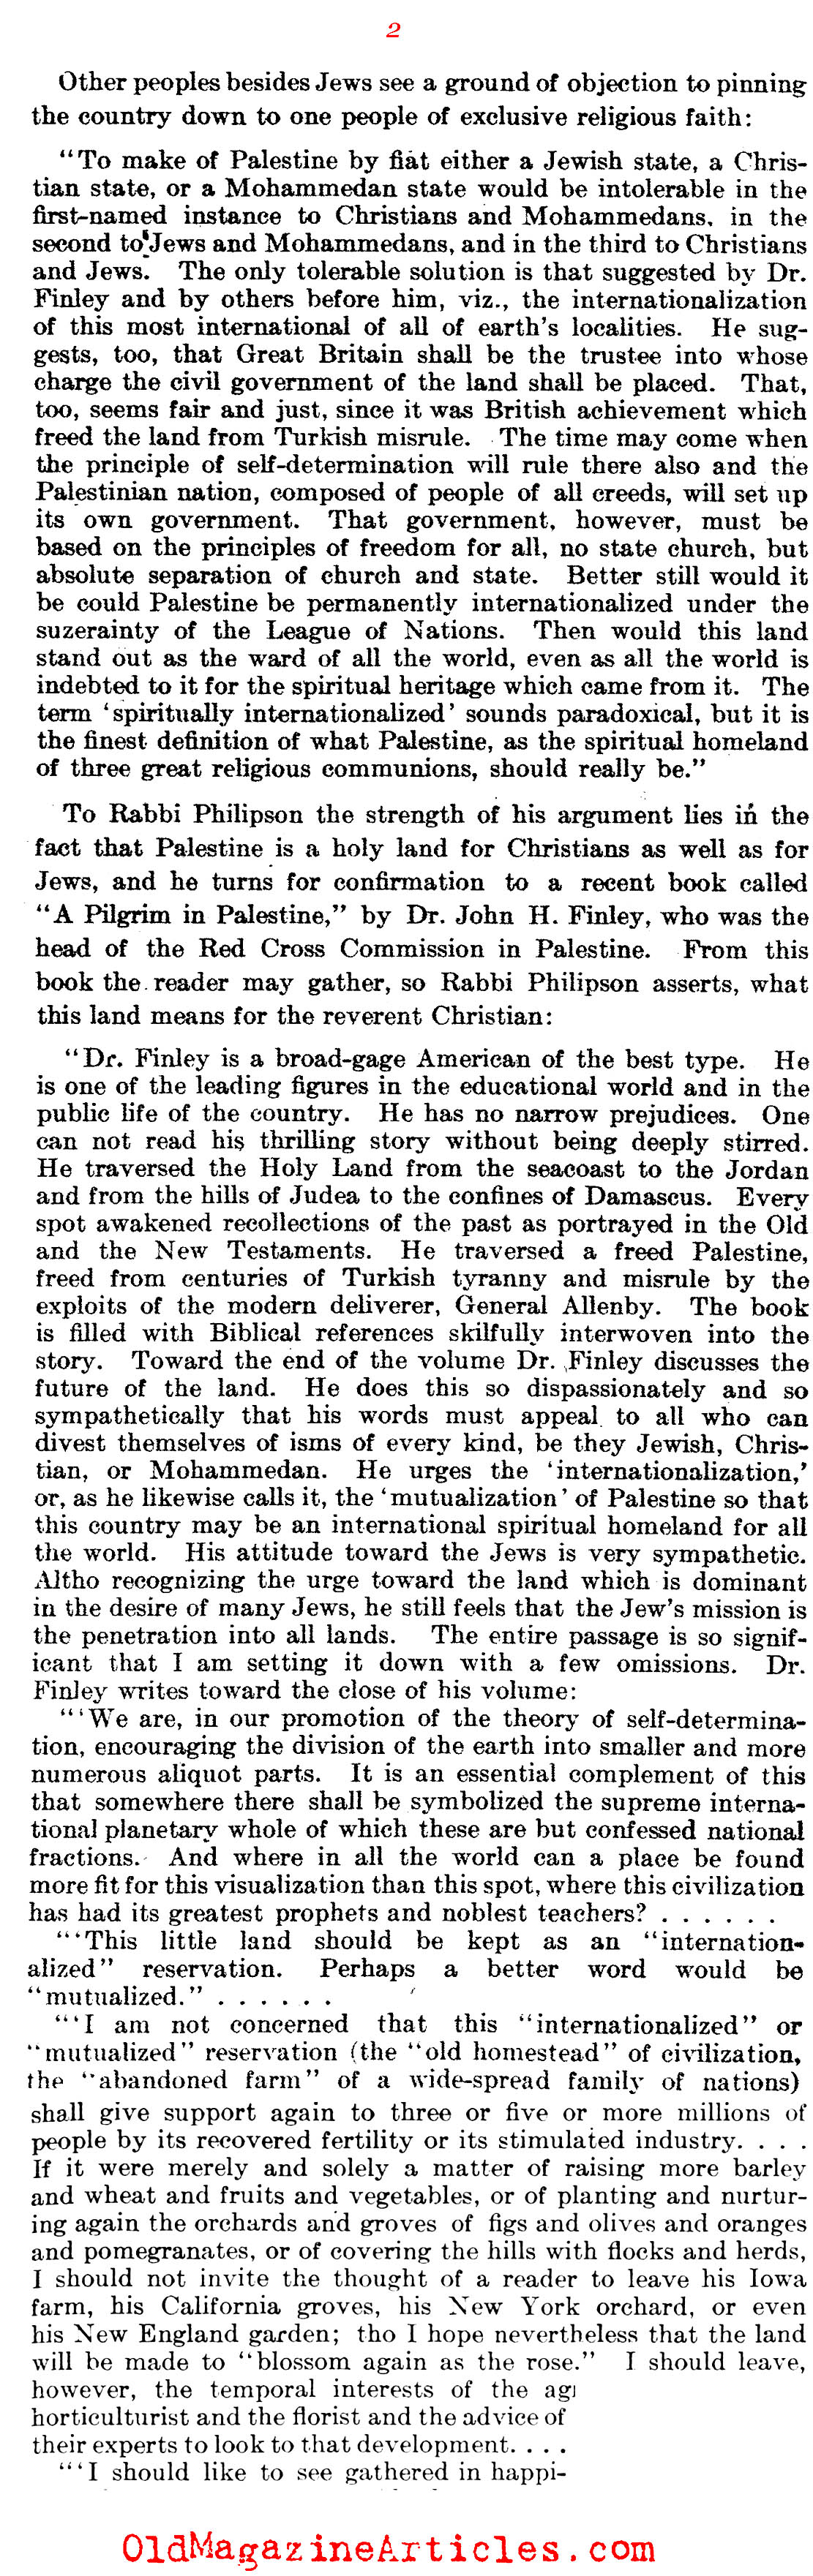 A Case Against the Zionists (Literary Digest, 1919)